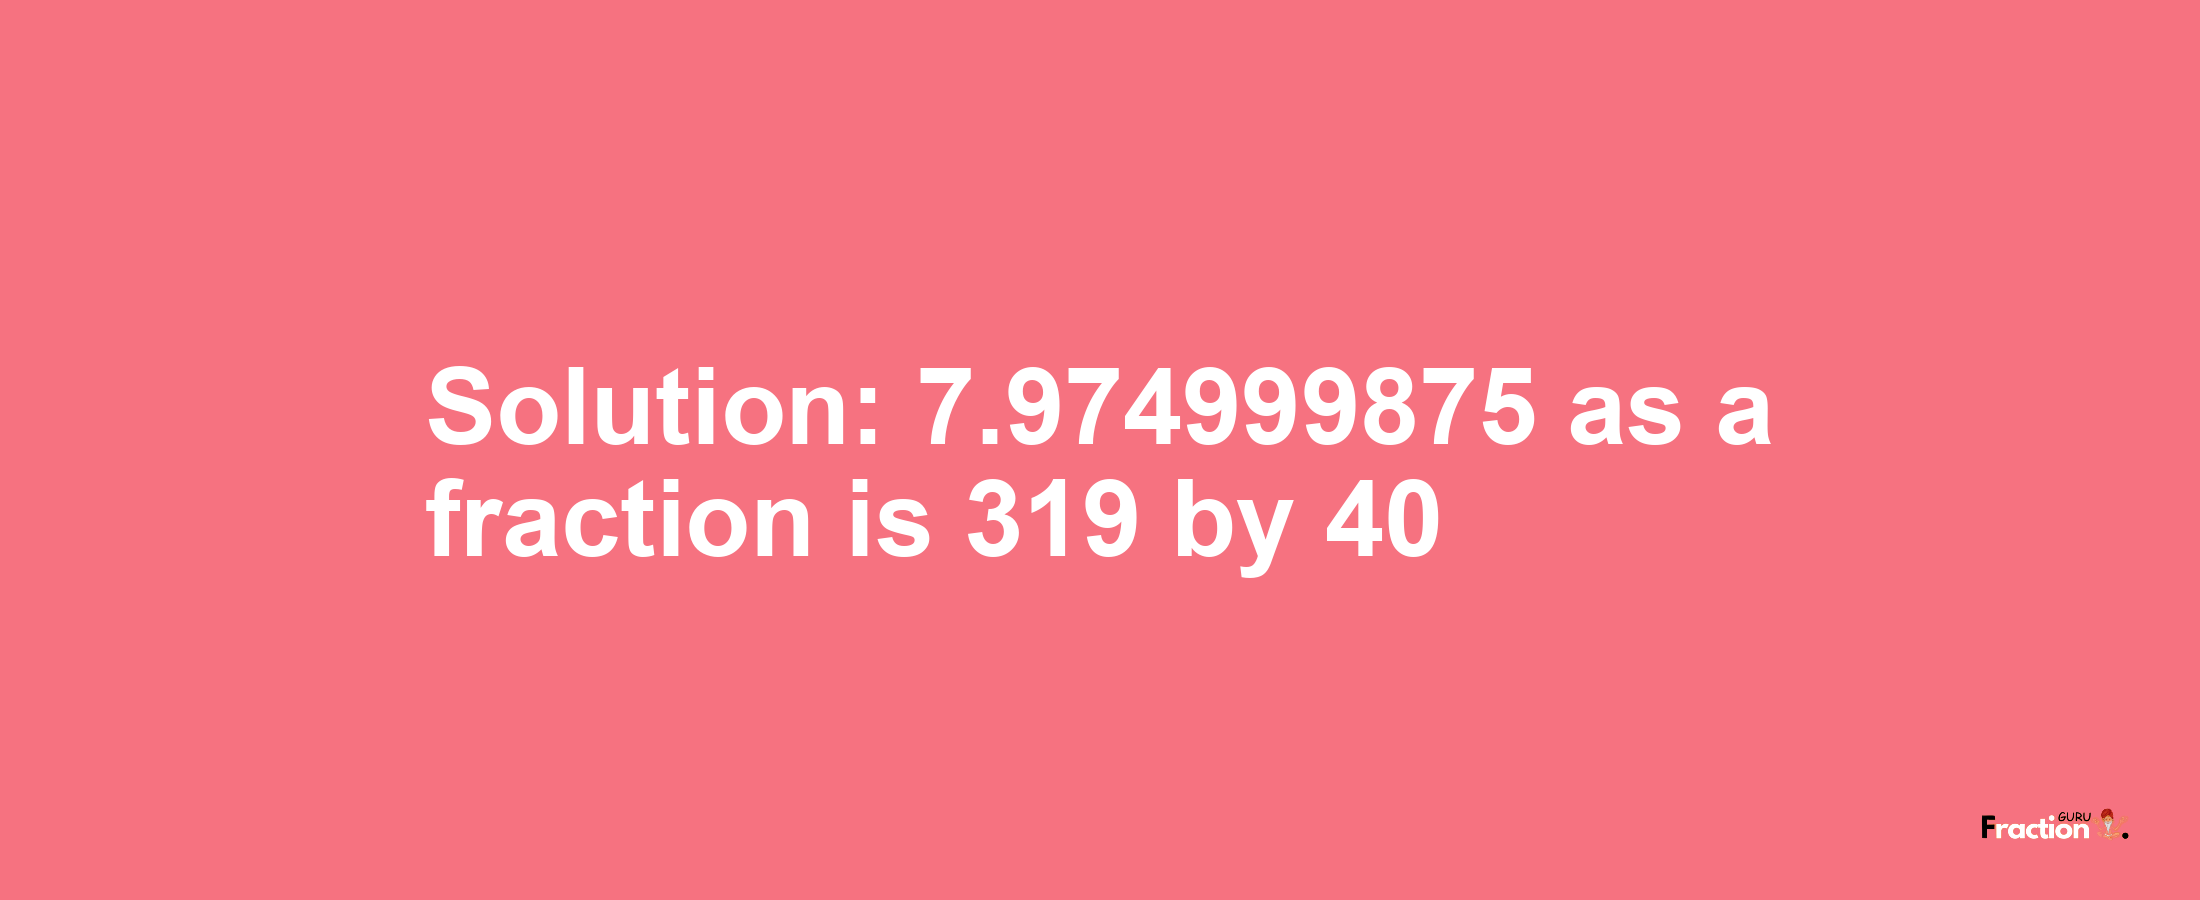 Solution:7.974999875 as a fraction is 319/40